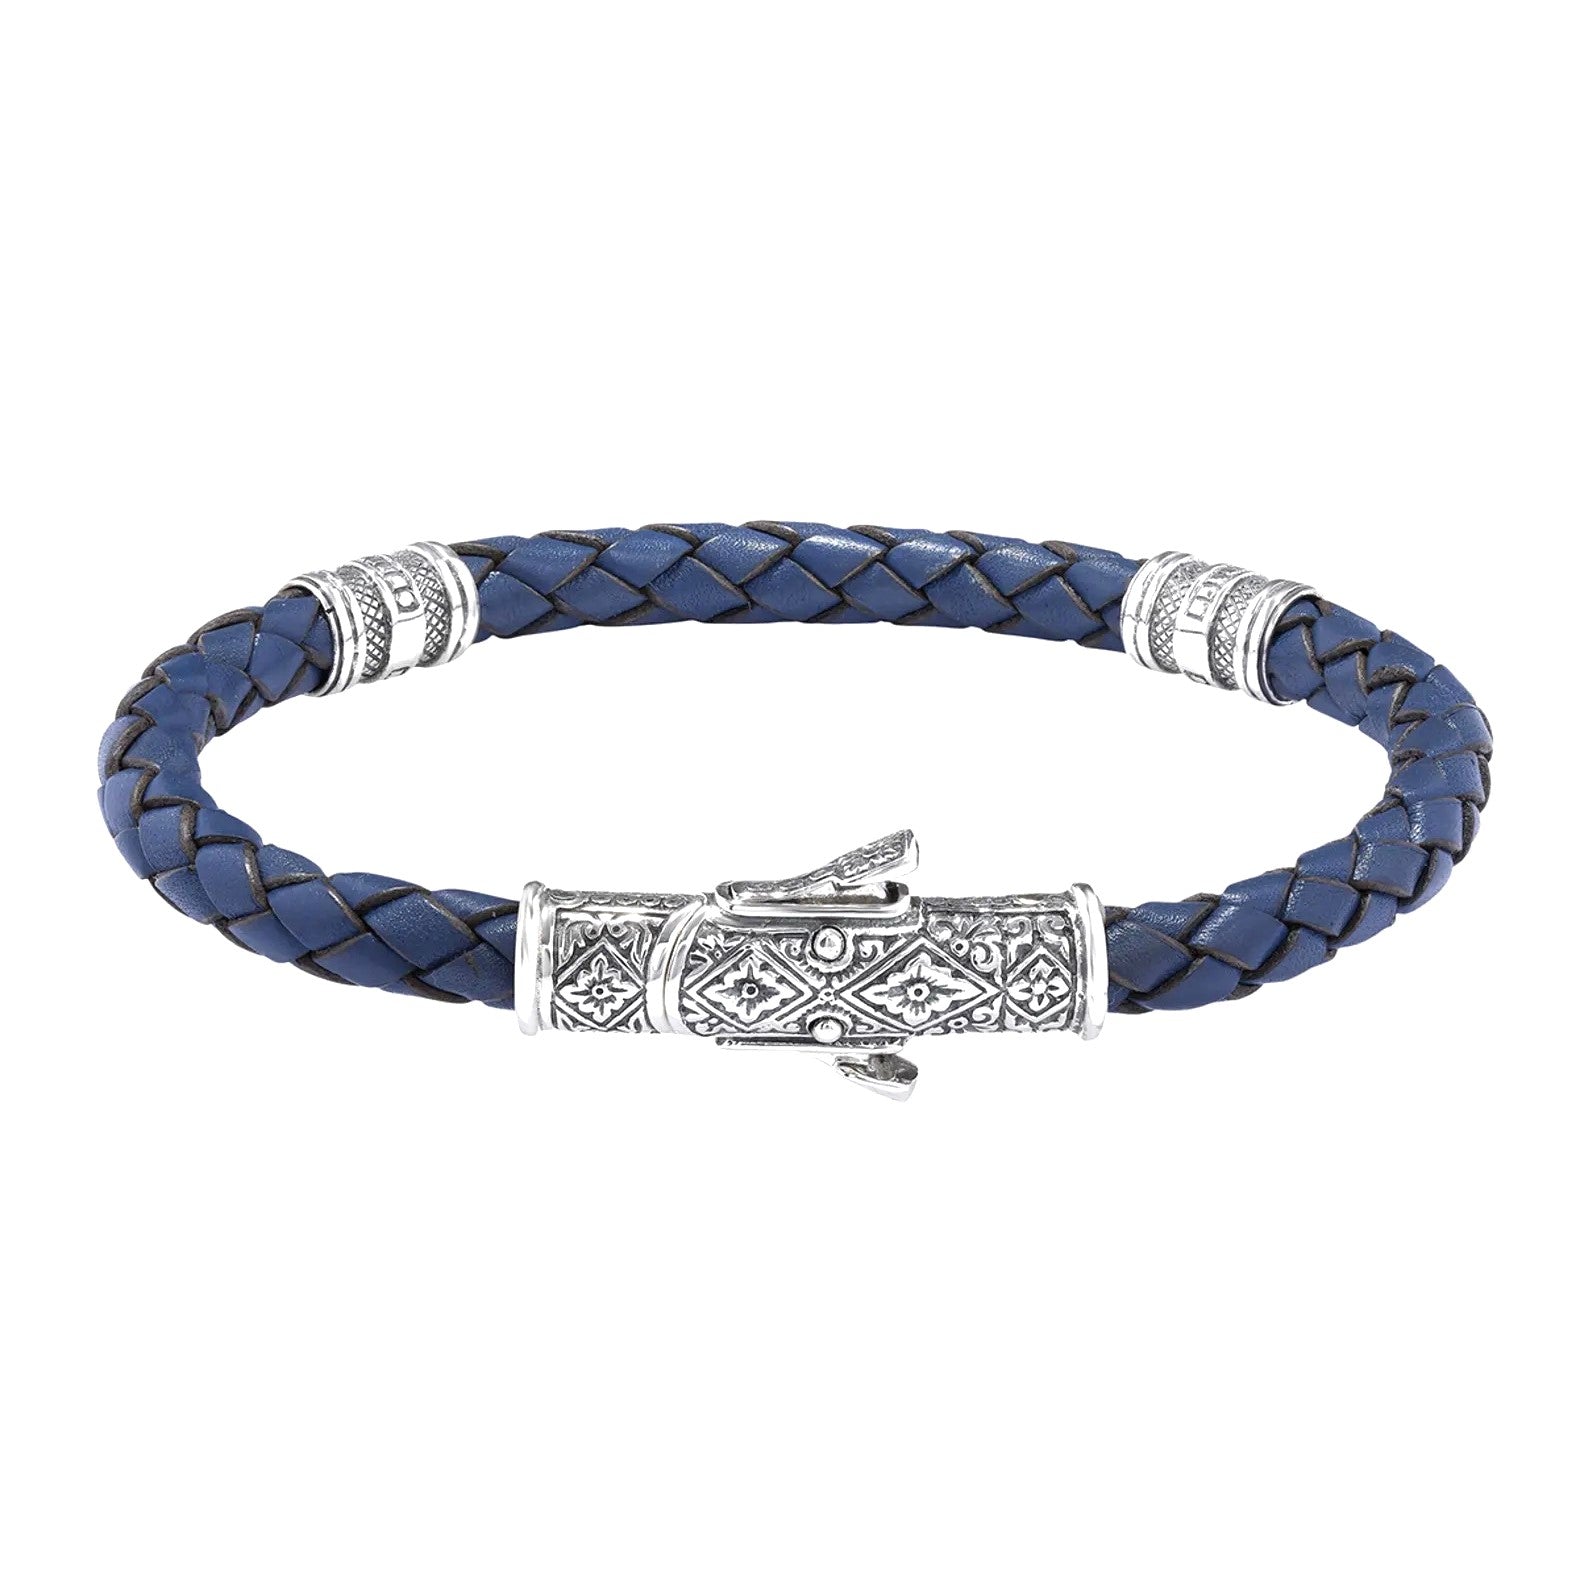 STERLING SILVER AND BLUE LEATHER BRACELET